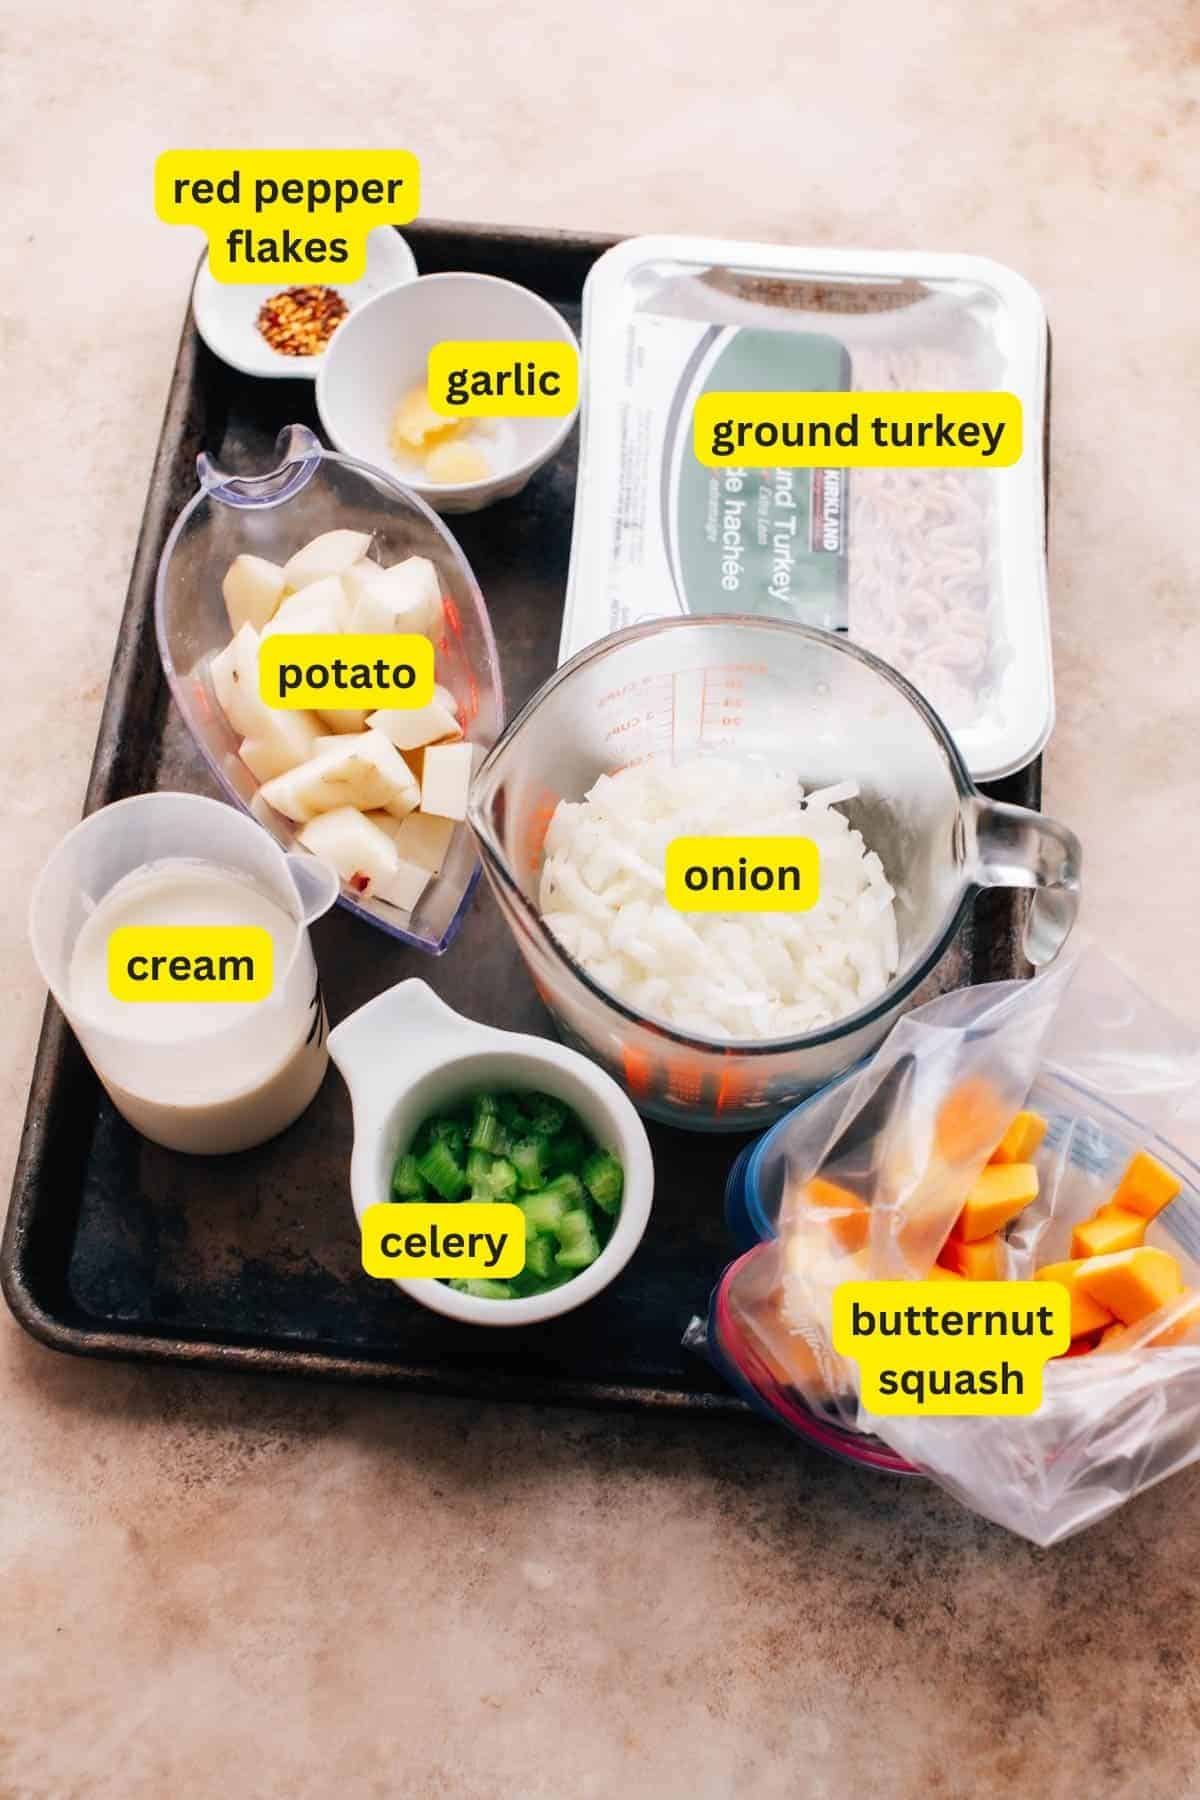 Ingredients for ground turkey soup are laid out on a kitchen countertop including celery, ground turkey, onion, minced garlic, red pepper flakes, potato, butternut squash and cream.